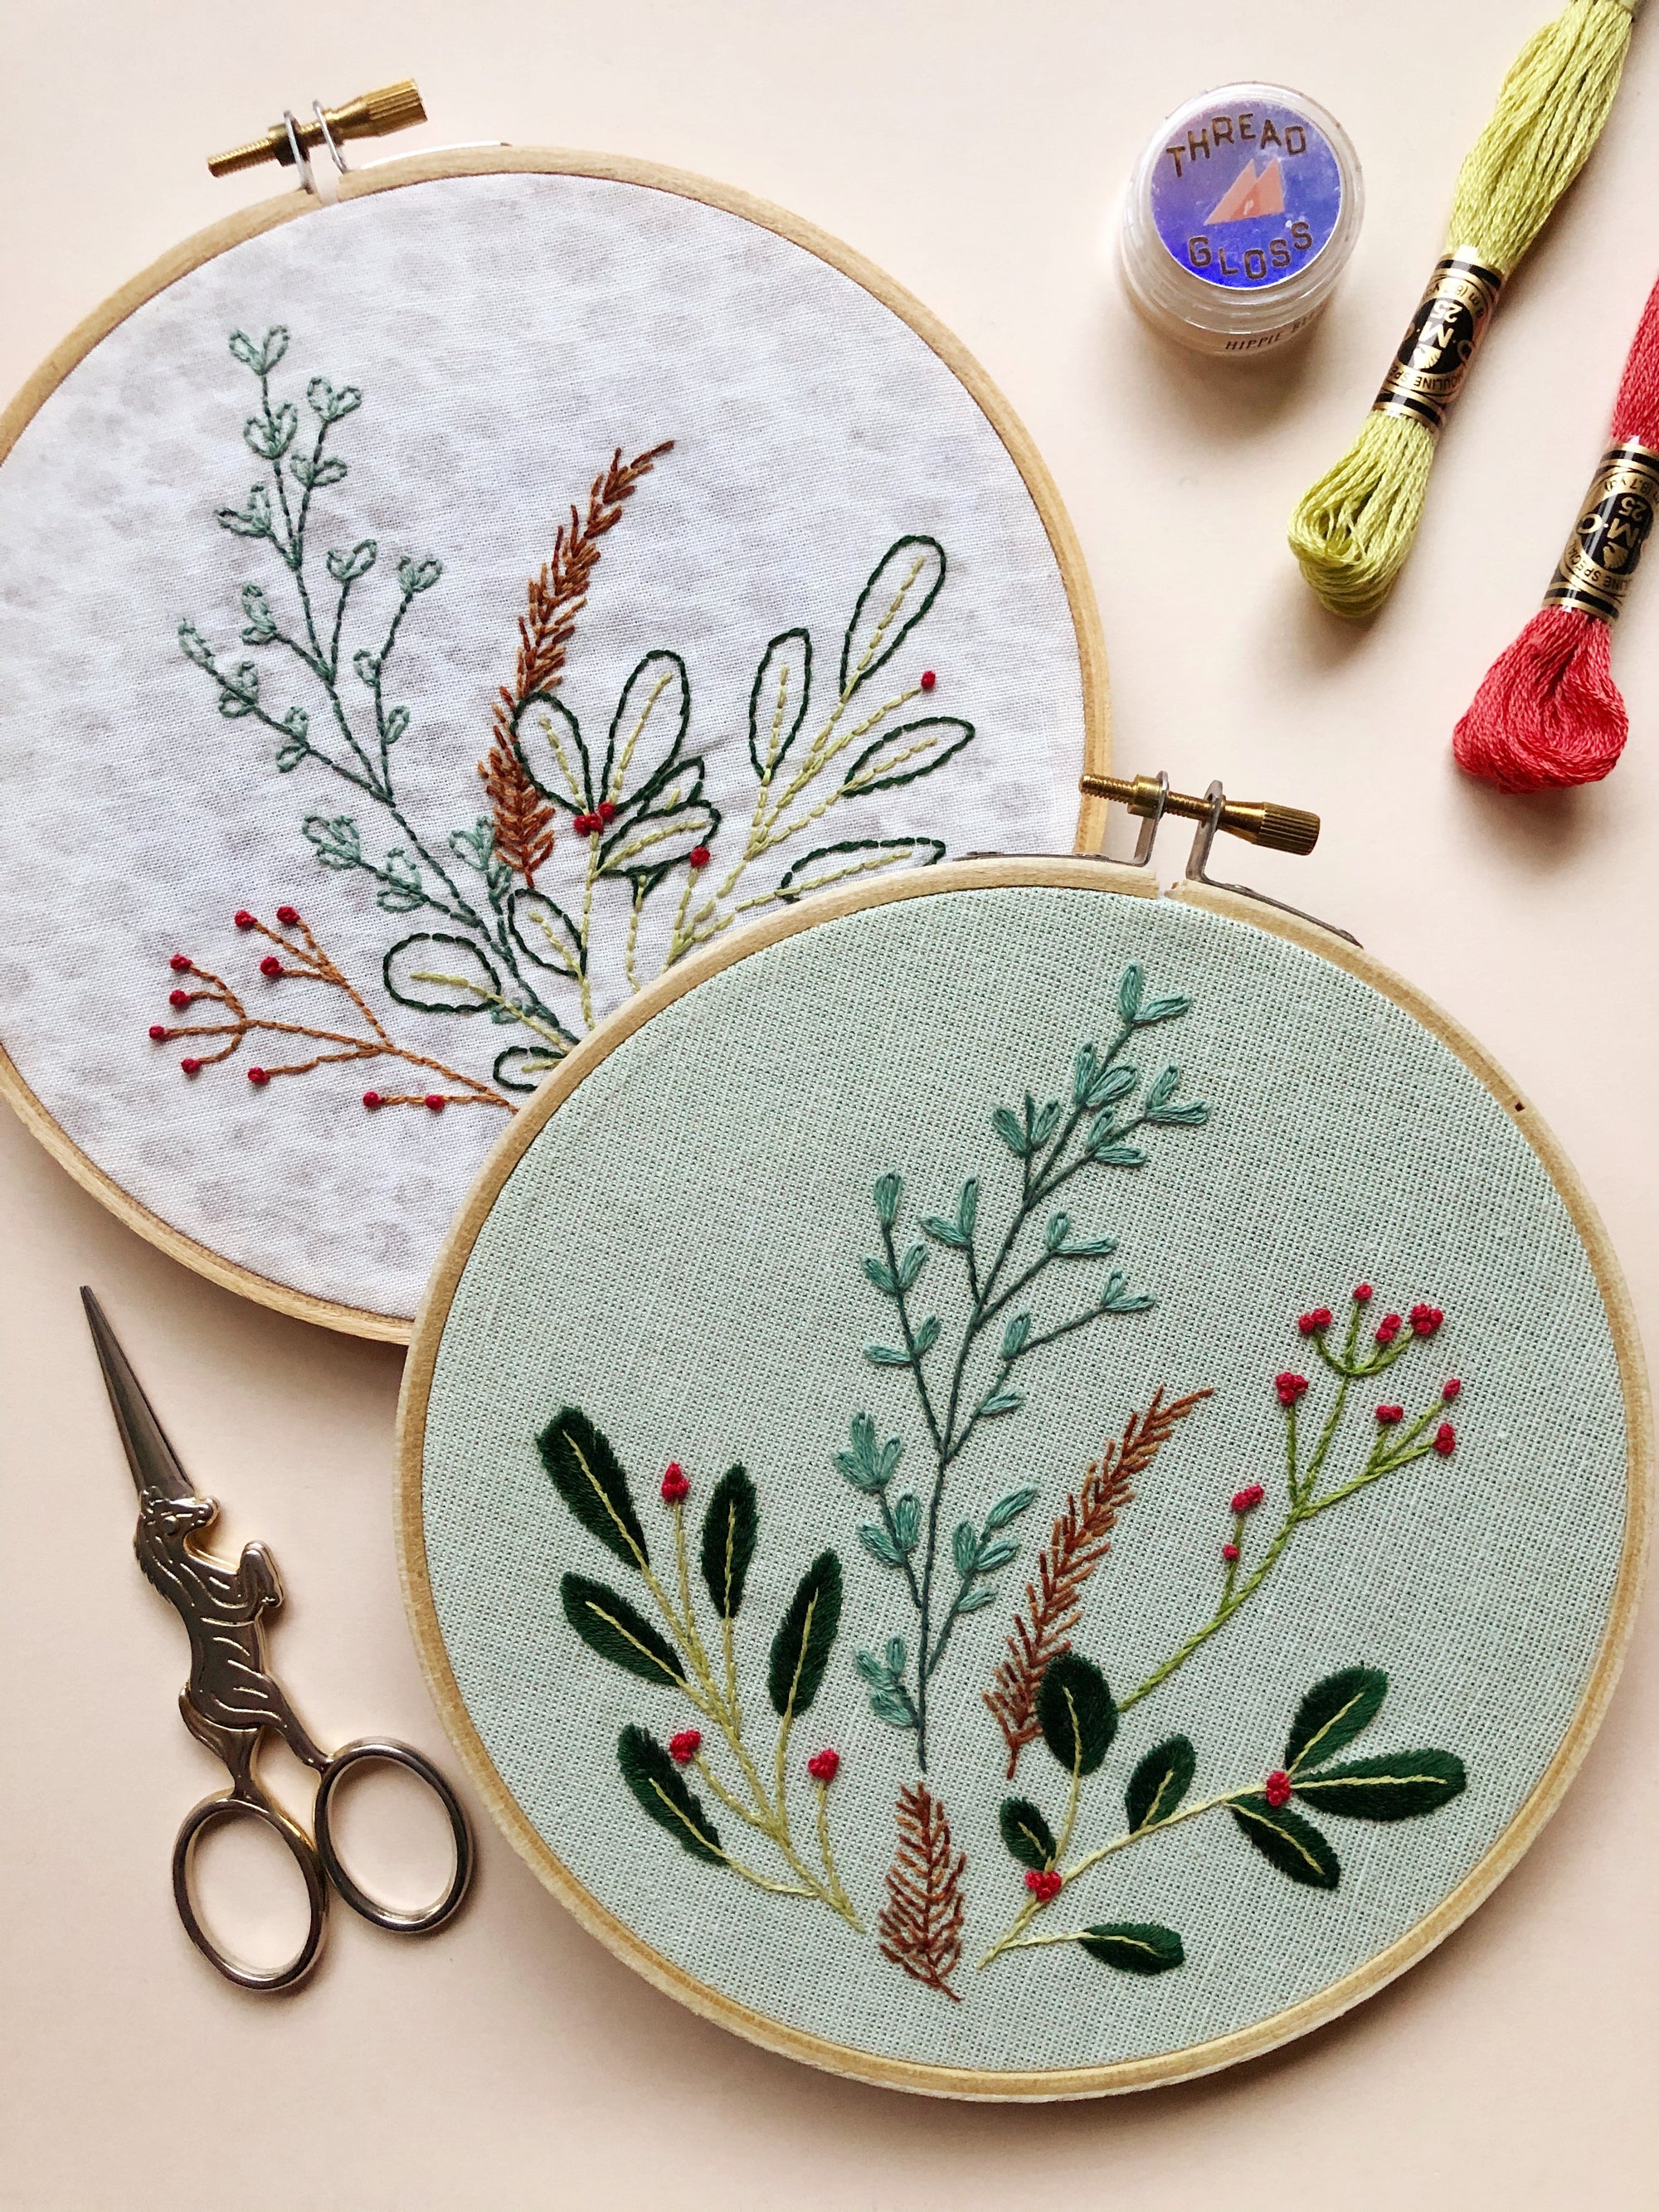 EMBROIDERY CLASS: Winter Botanical Embroidery Basics